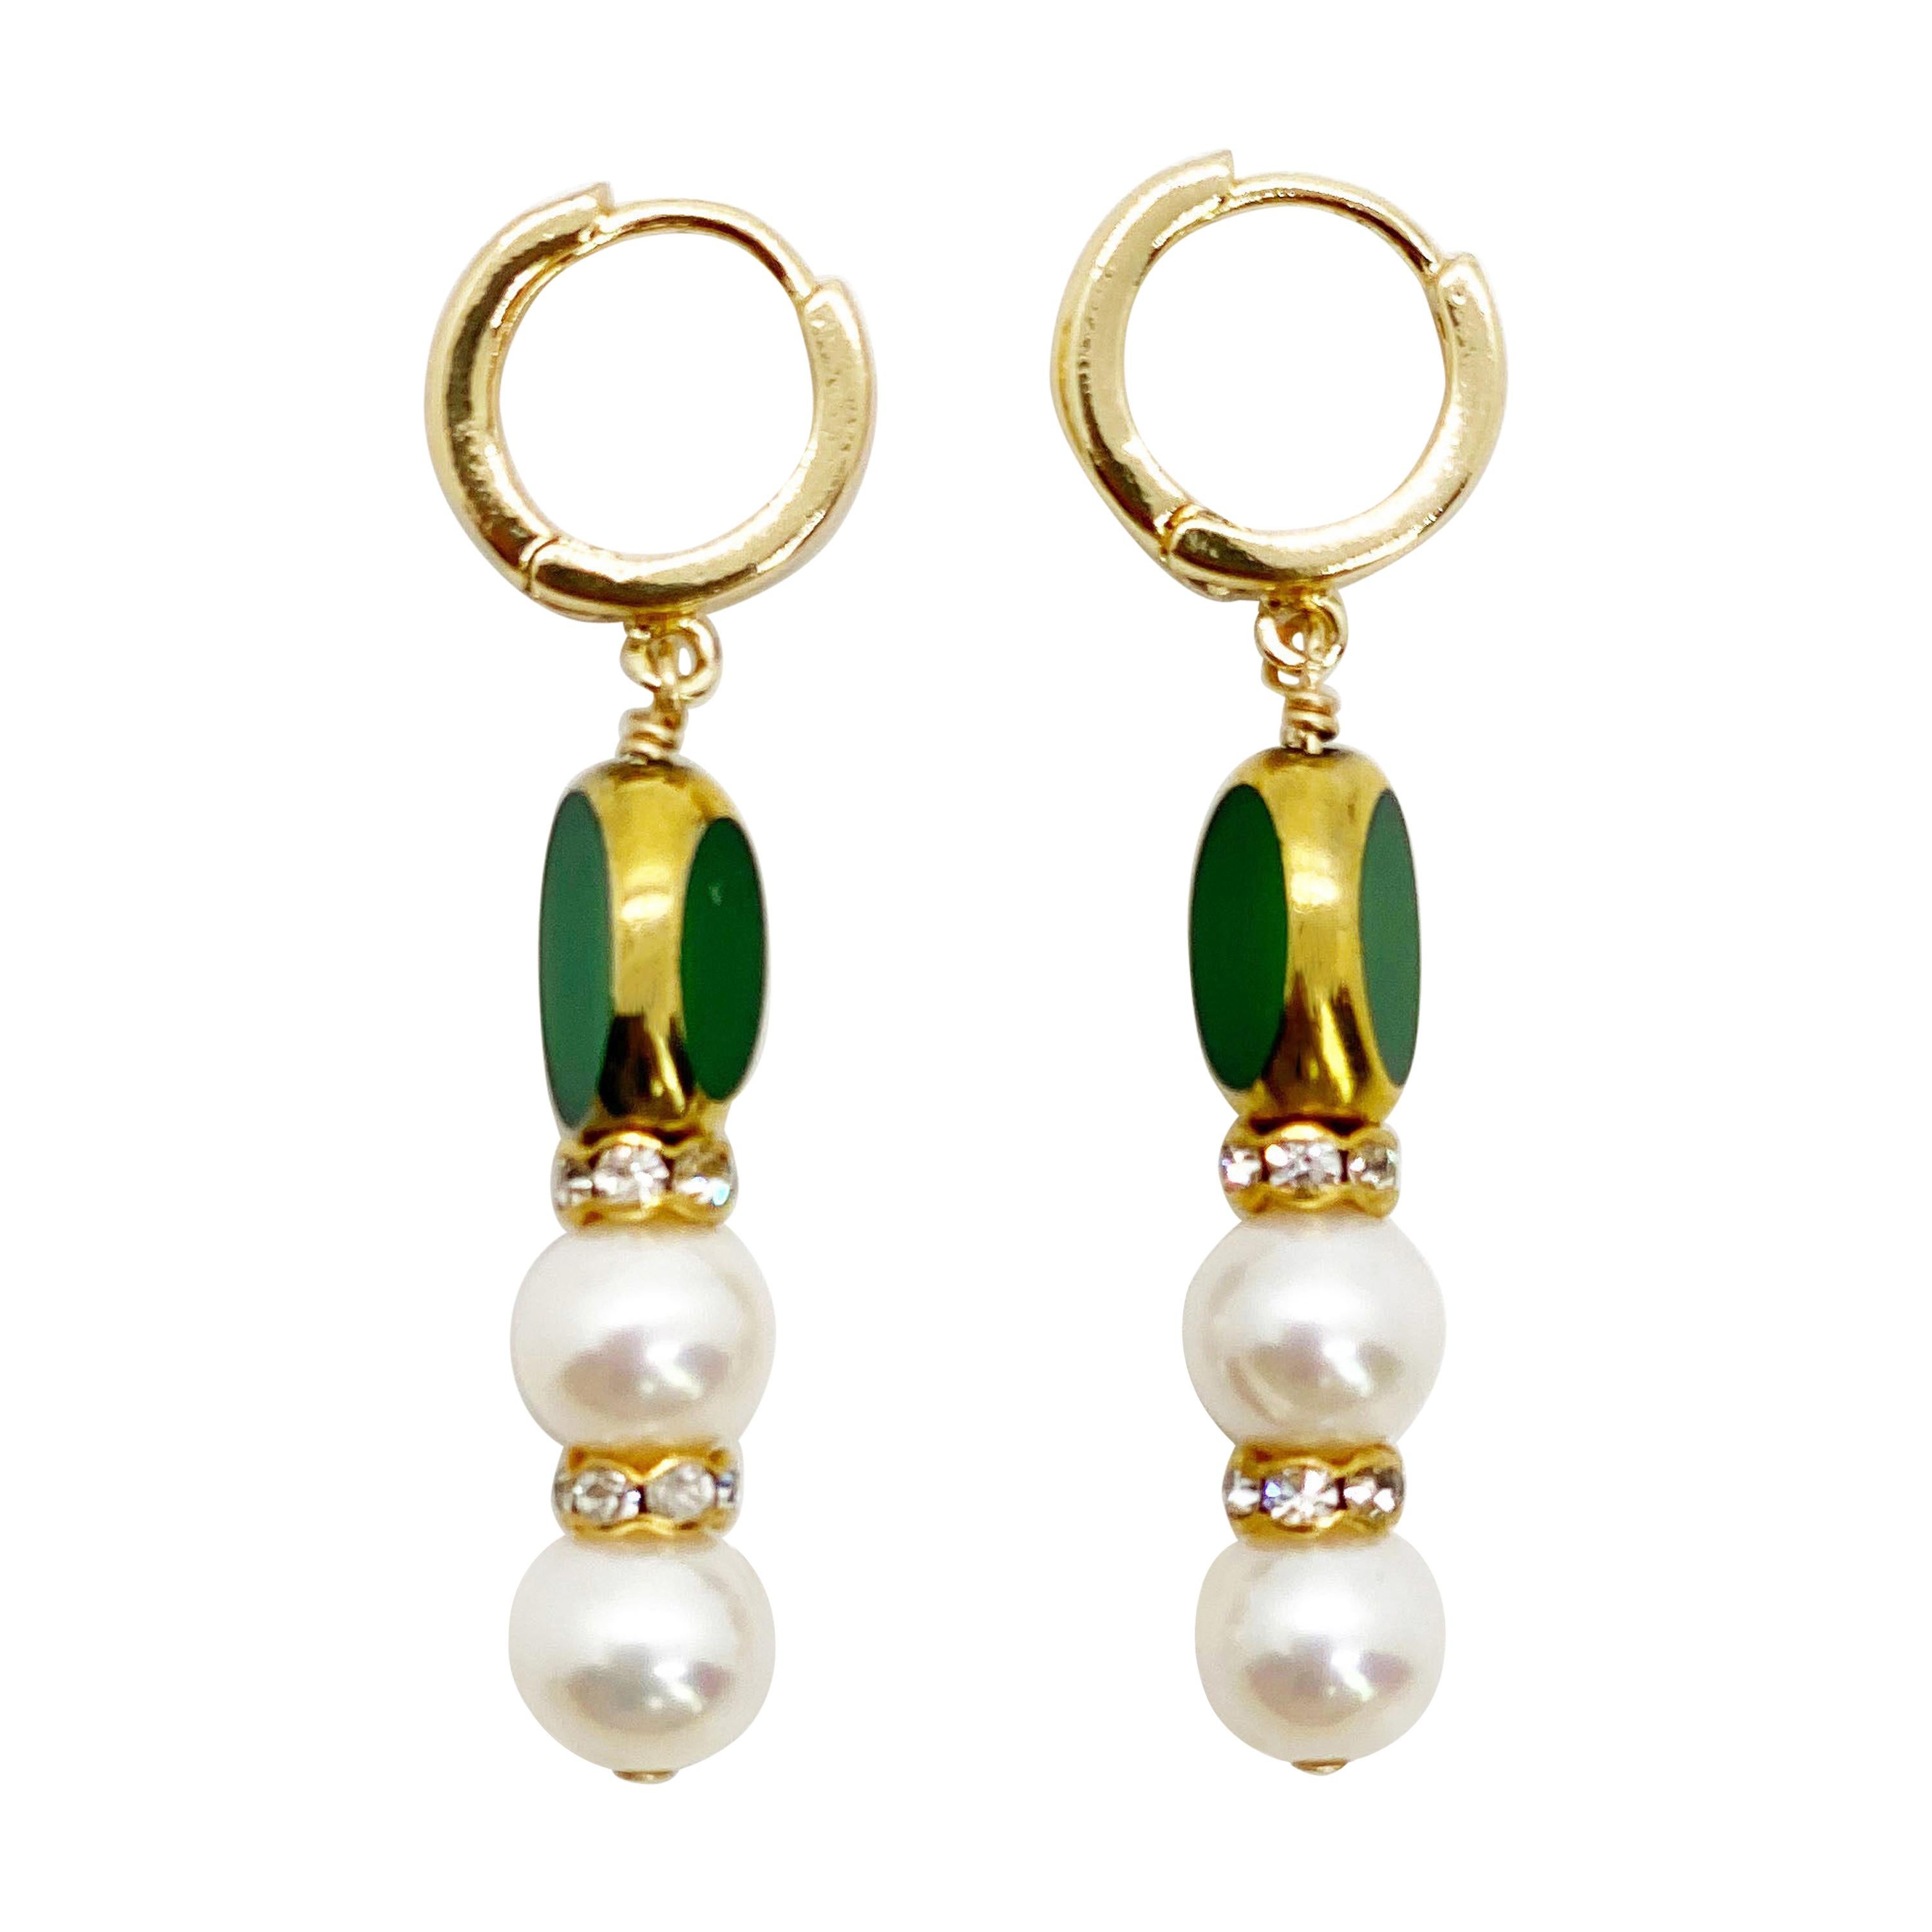 Pearls & Matte Green Vintage German Glass Beads edged with 24K gold Earrings For Sale